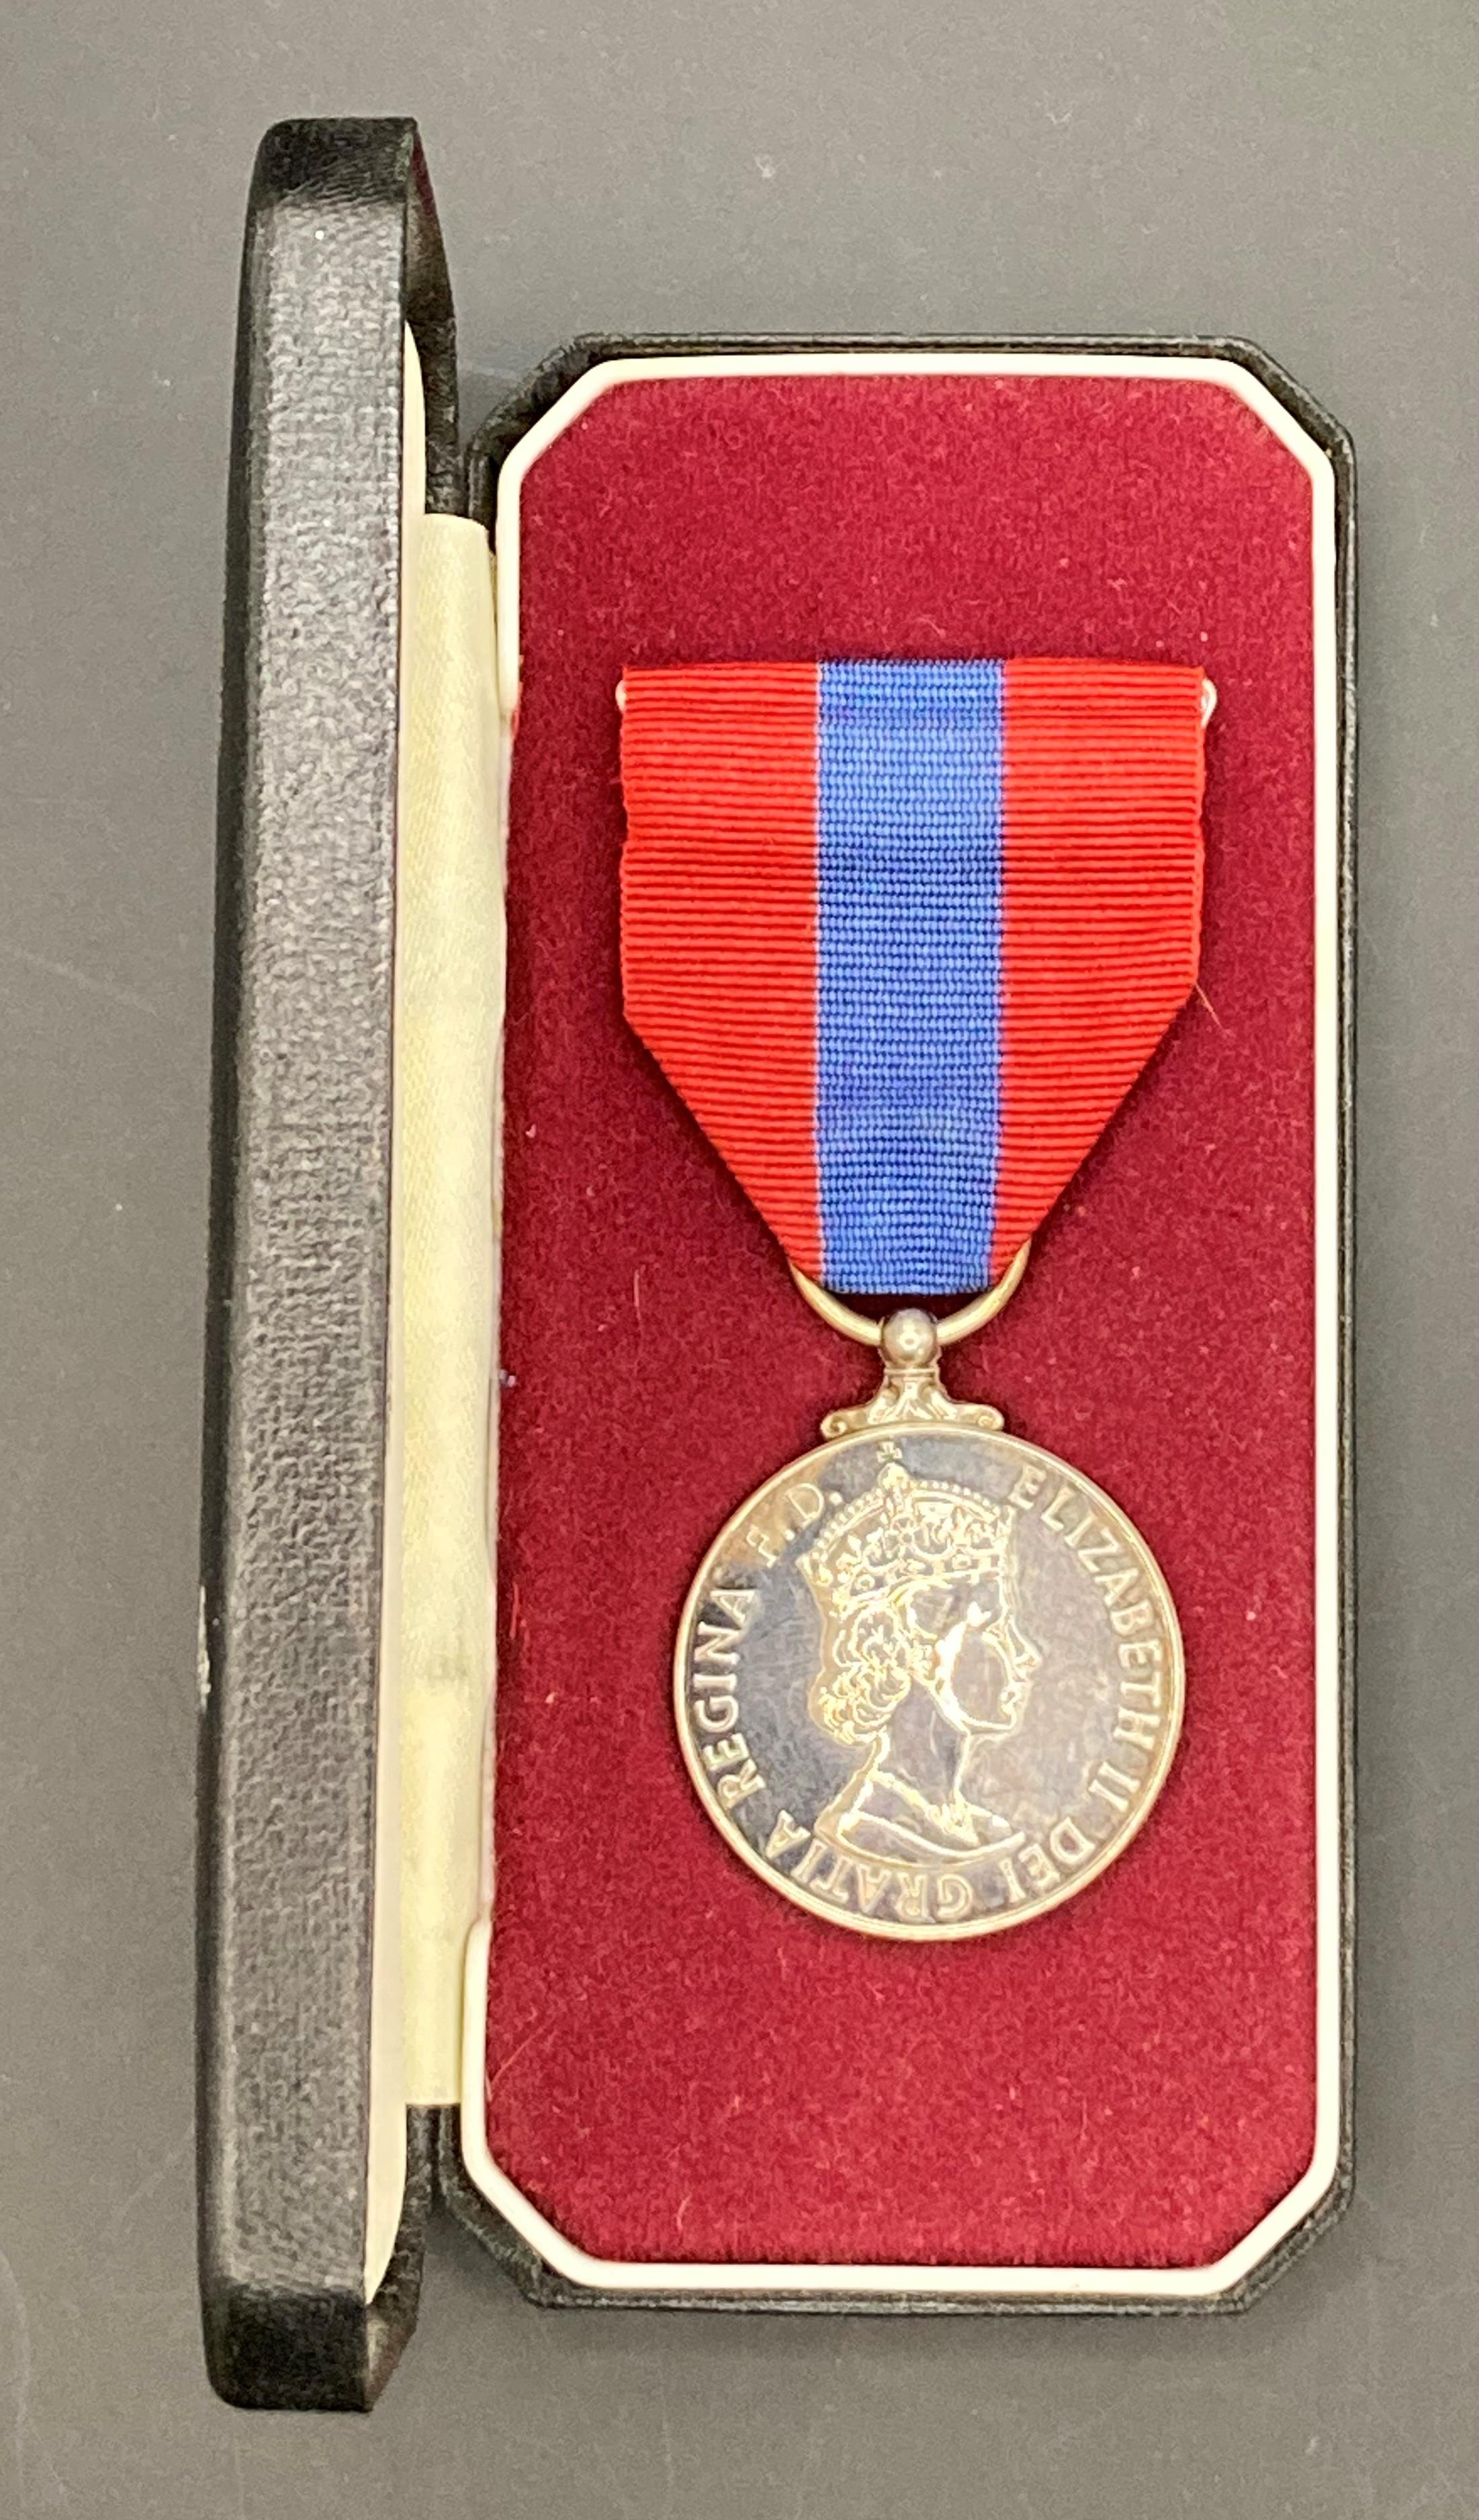 Imperial Service Medal (Queen Elizabeth II) complete with ribbon to Mrs Sheila Mary Wilson,